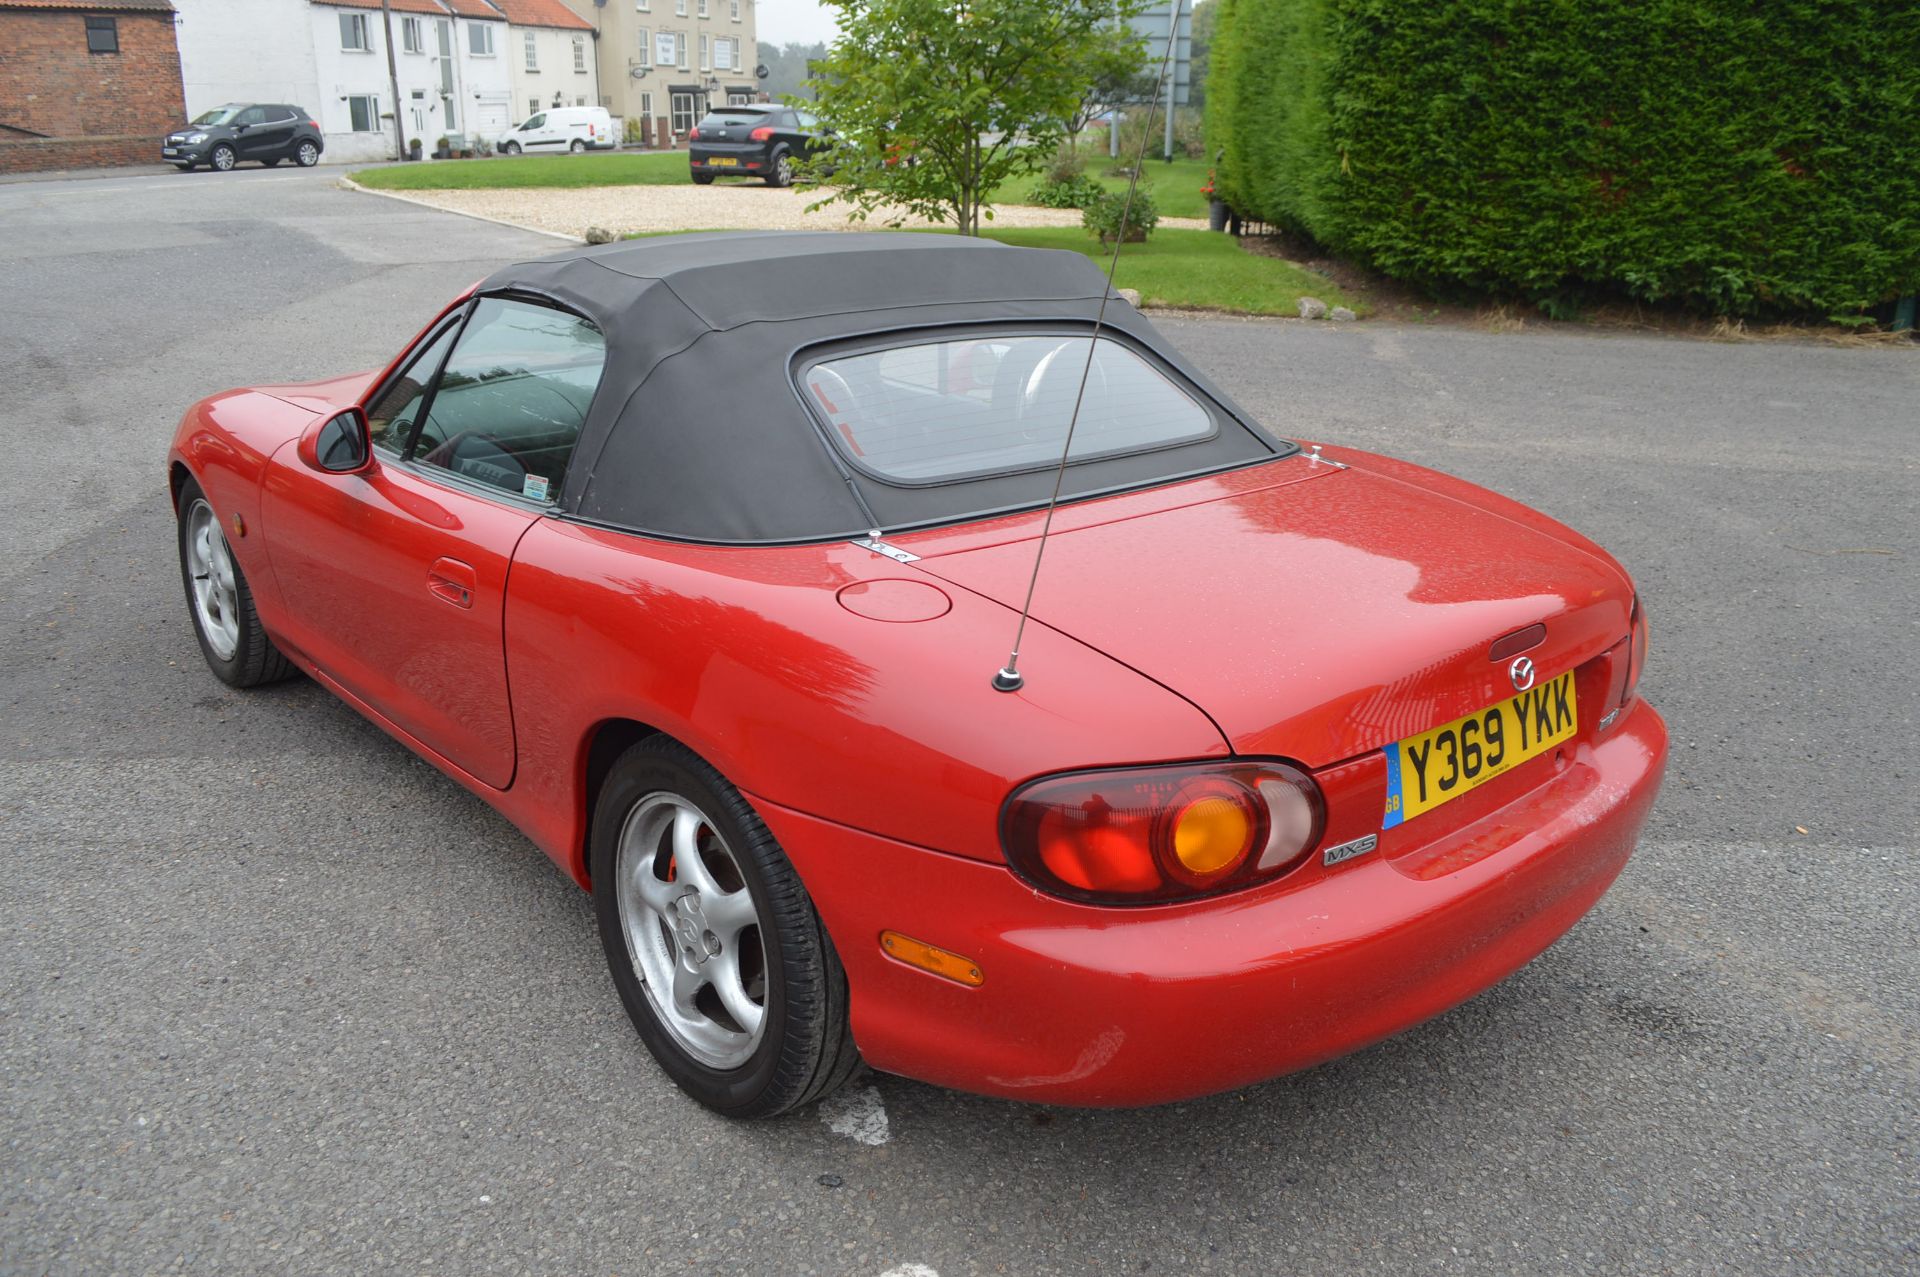 2001/Y REG MAZDA MX-5 1.81 CONVERTIBLE, UPRATED SUSPENSION, BRAKES, INDUCTION ETC - Image 4 of 17